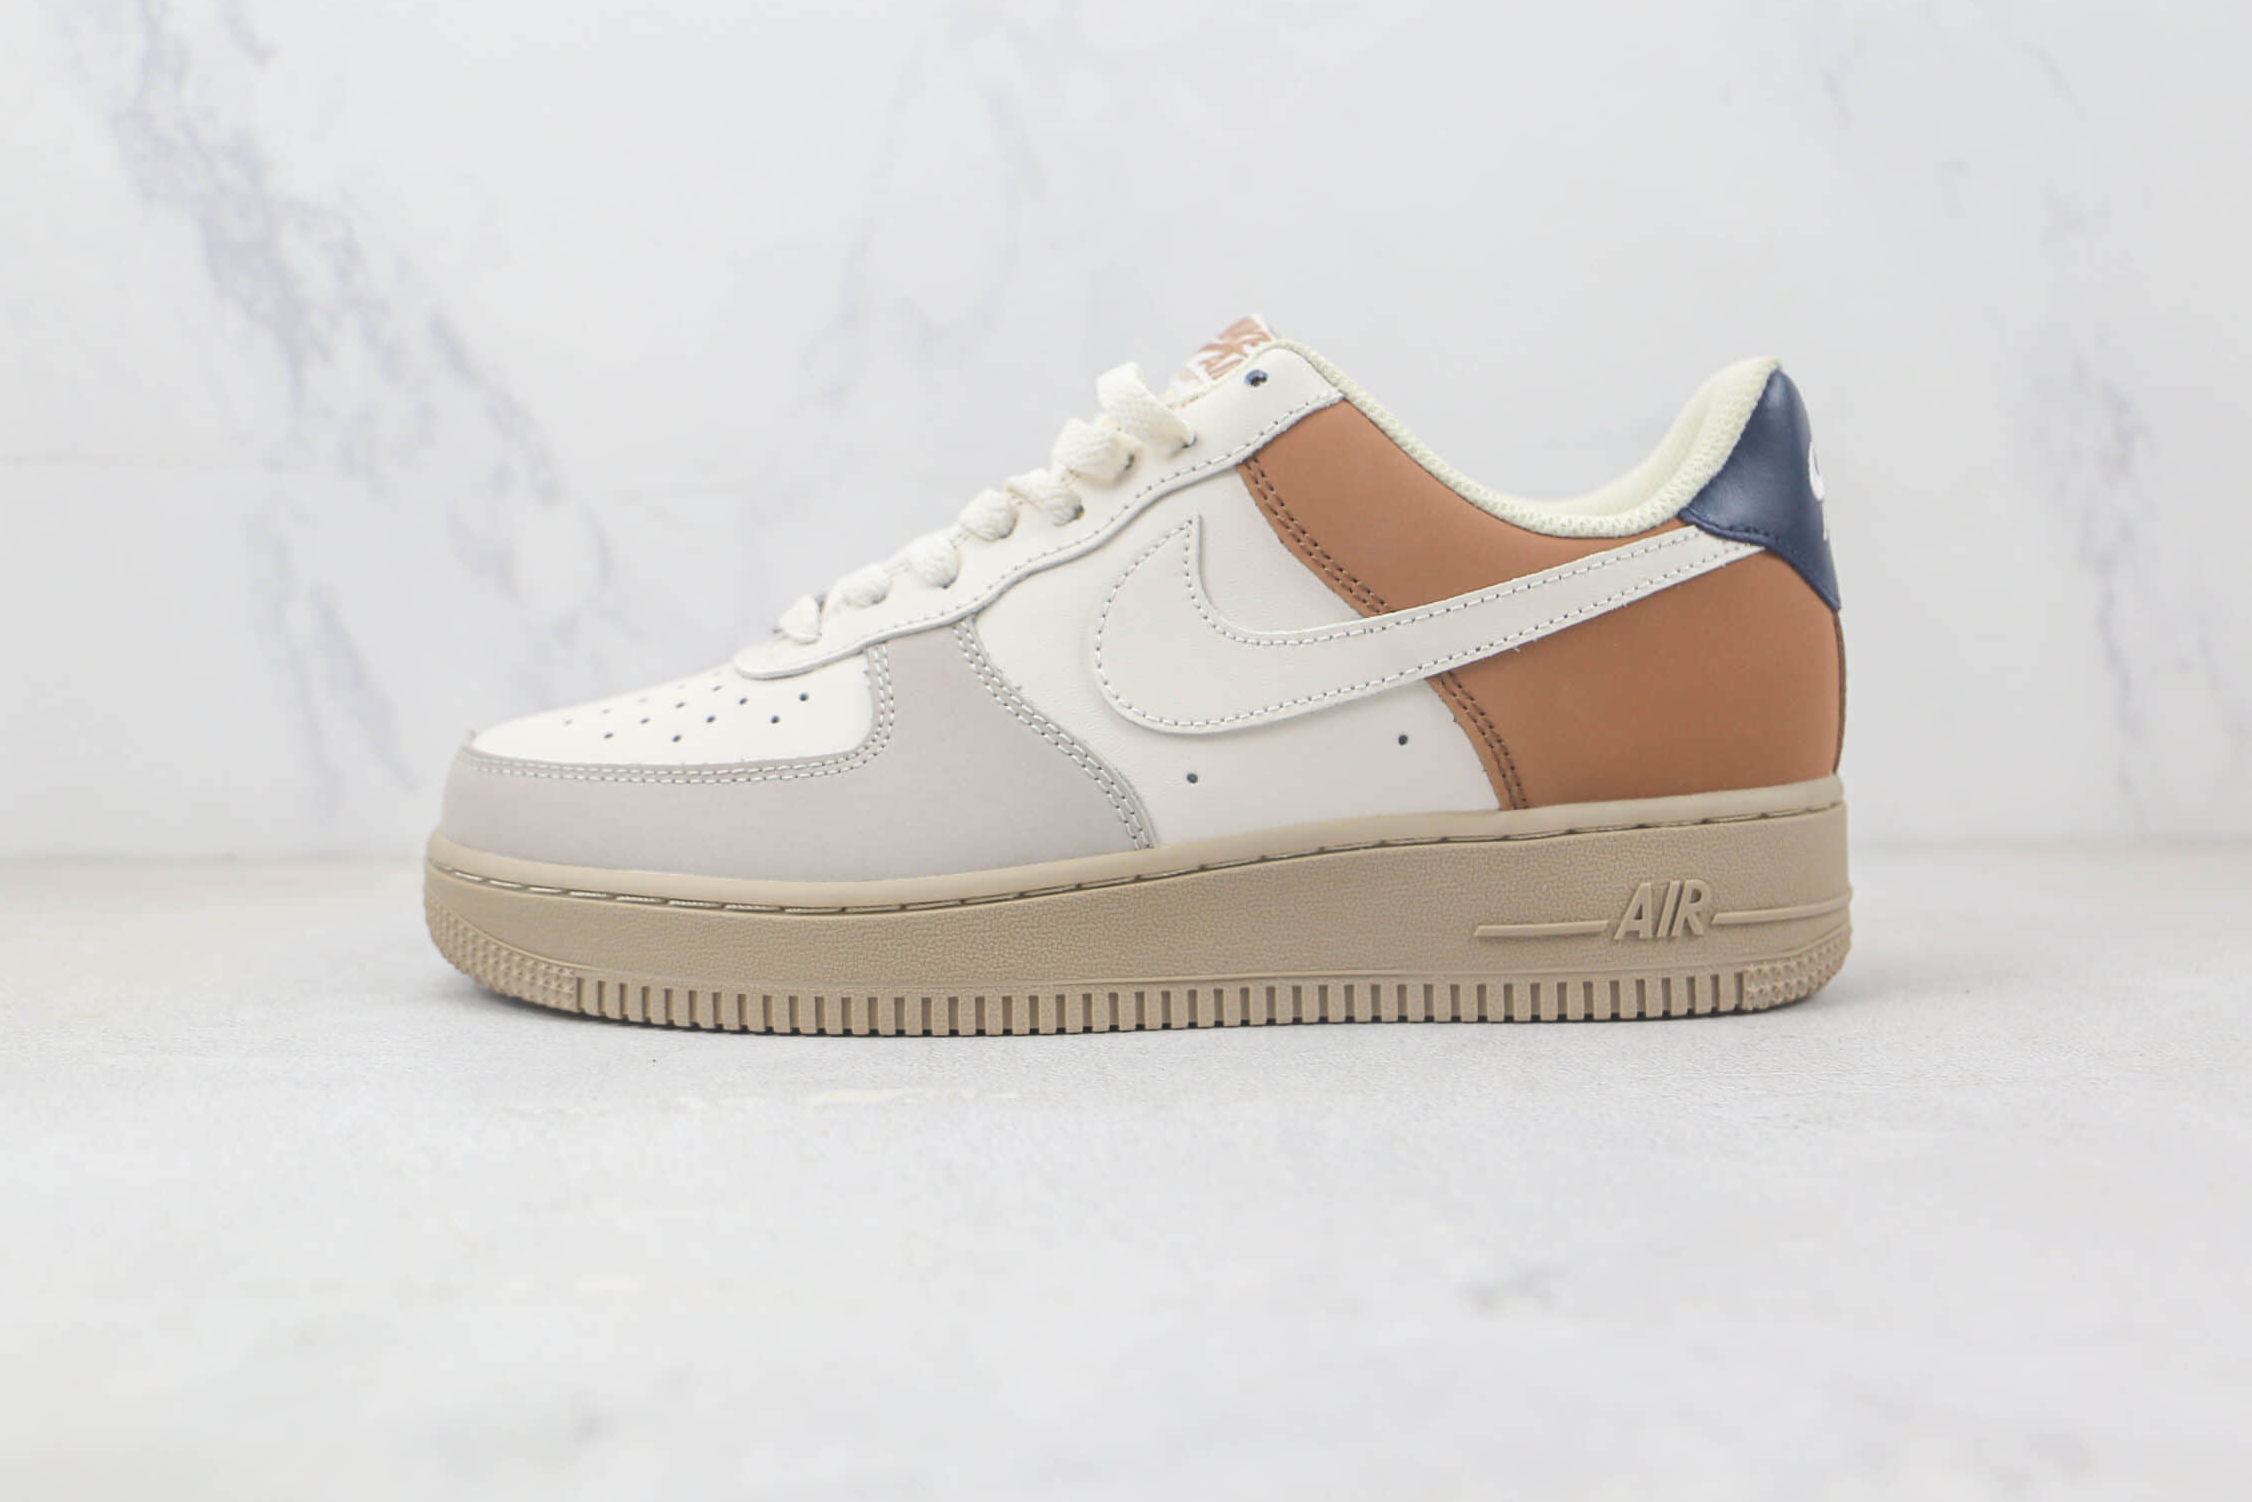 Nike Air Force 1 07 Low White Navy Blue Brown Shoes BS8871-107 - Stylish Sneakers for Men